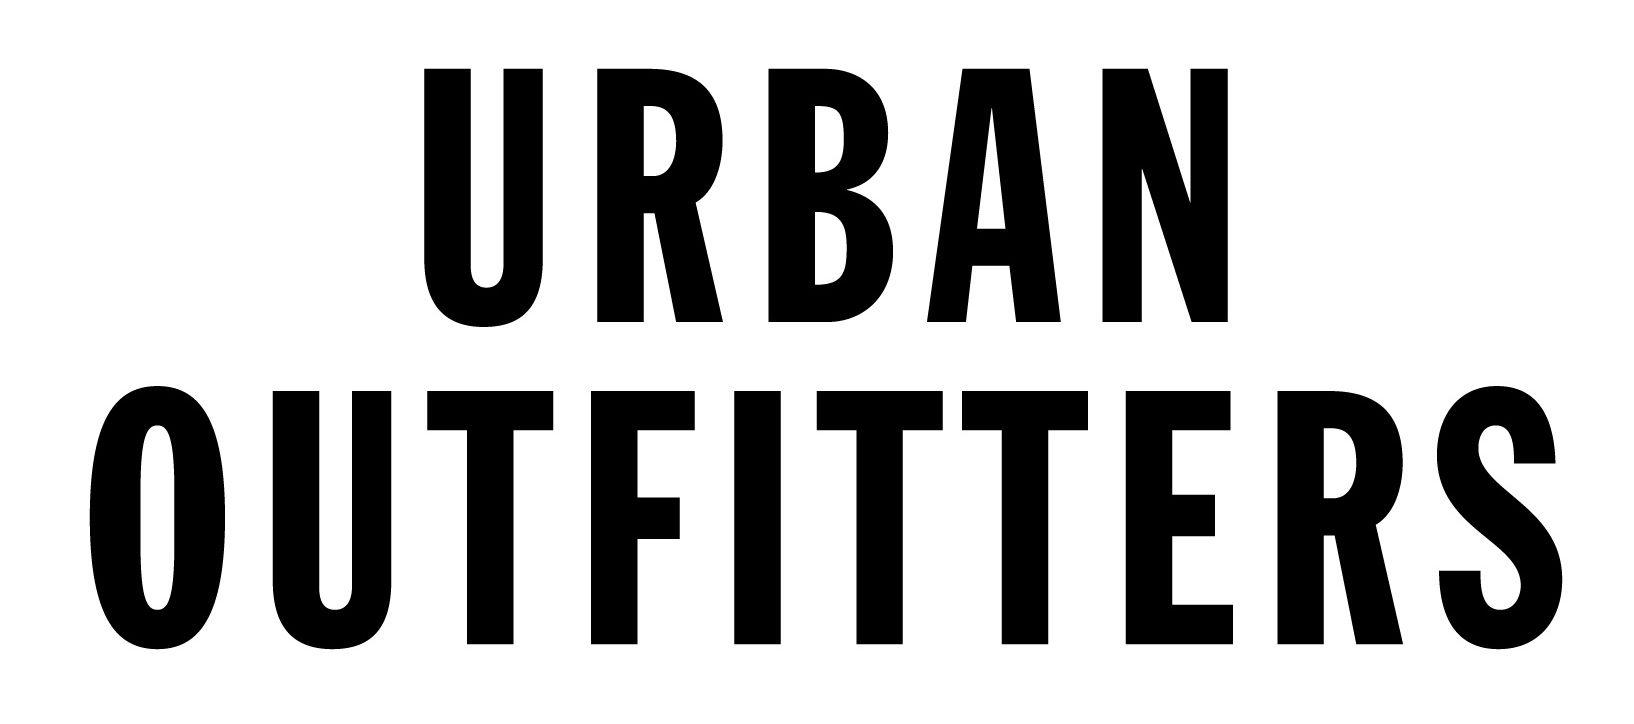 Urban Outfitters Logo - Urban Outfitters Customer Service Contact Number and Review: 0845